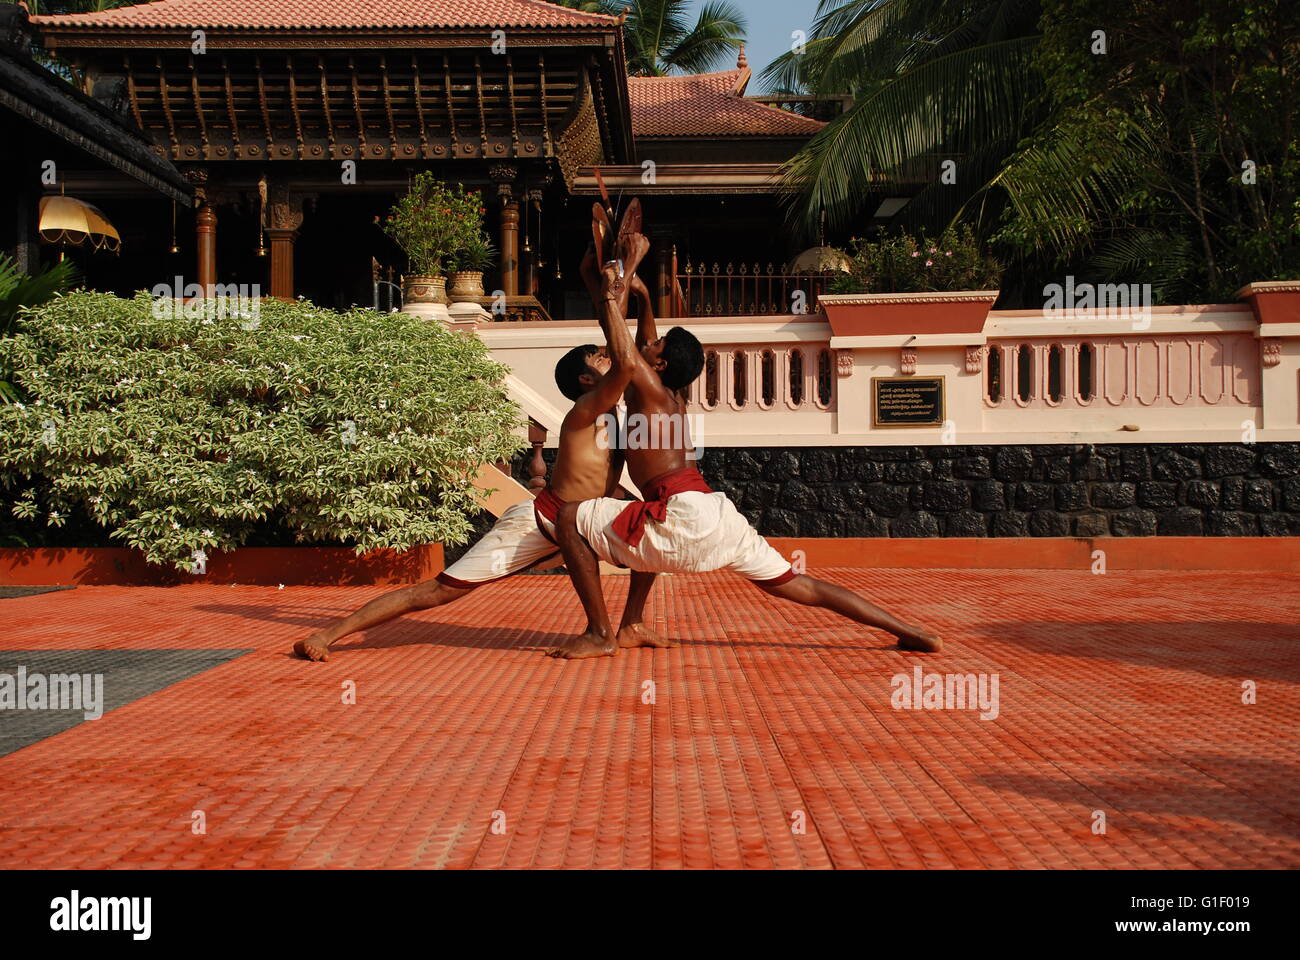 Kalaripaittu - the ancient martial art of Kerala, India thought to be the forerunner of martial arts of the Far East. Stock Photo